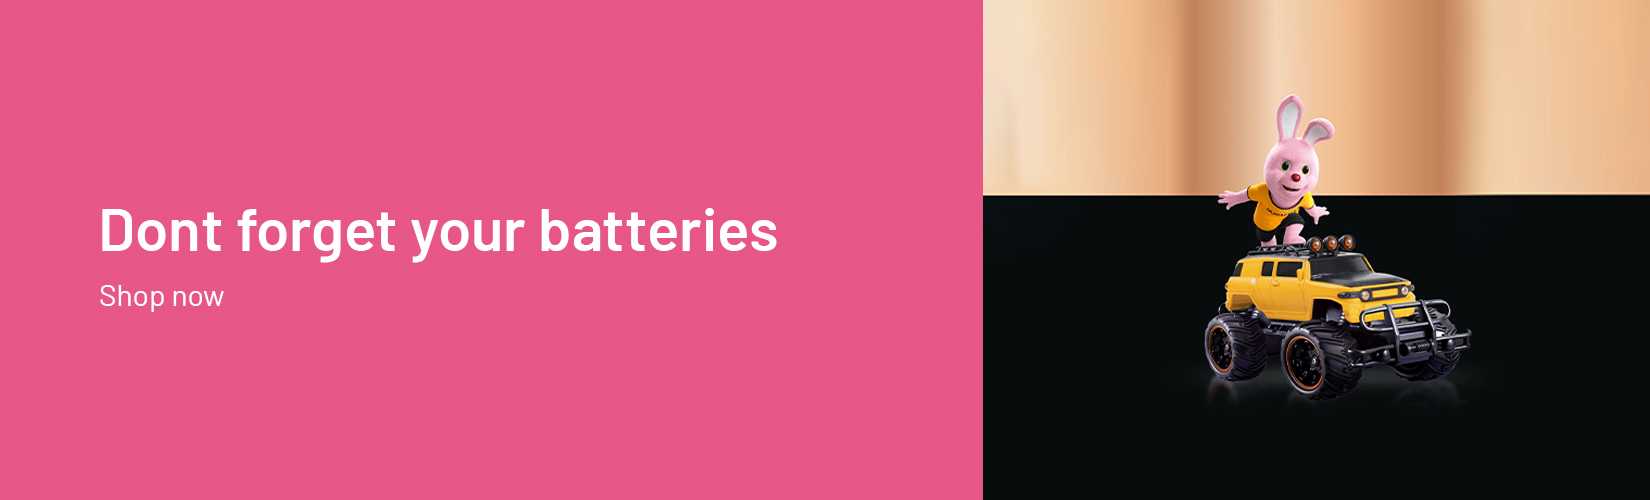 Don't forget your batteries. Shop now.